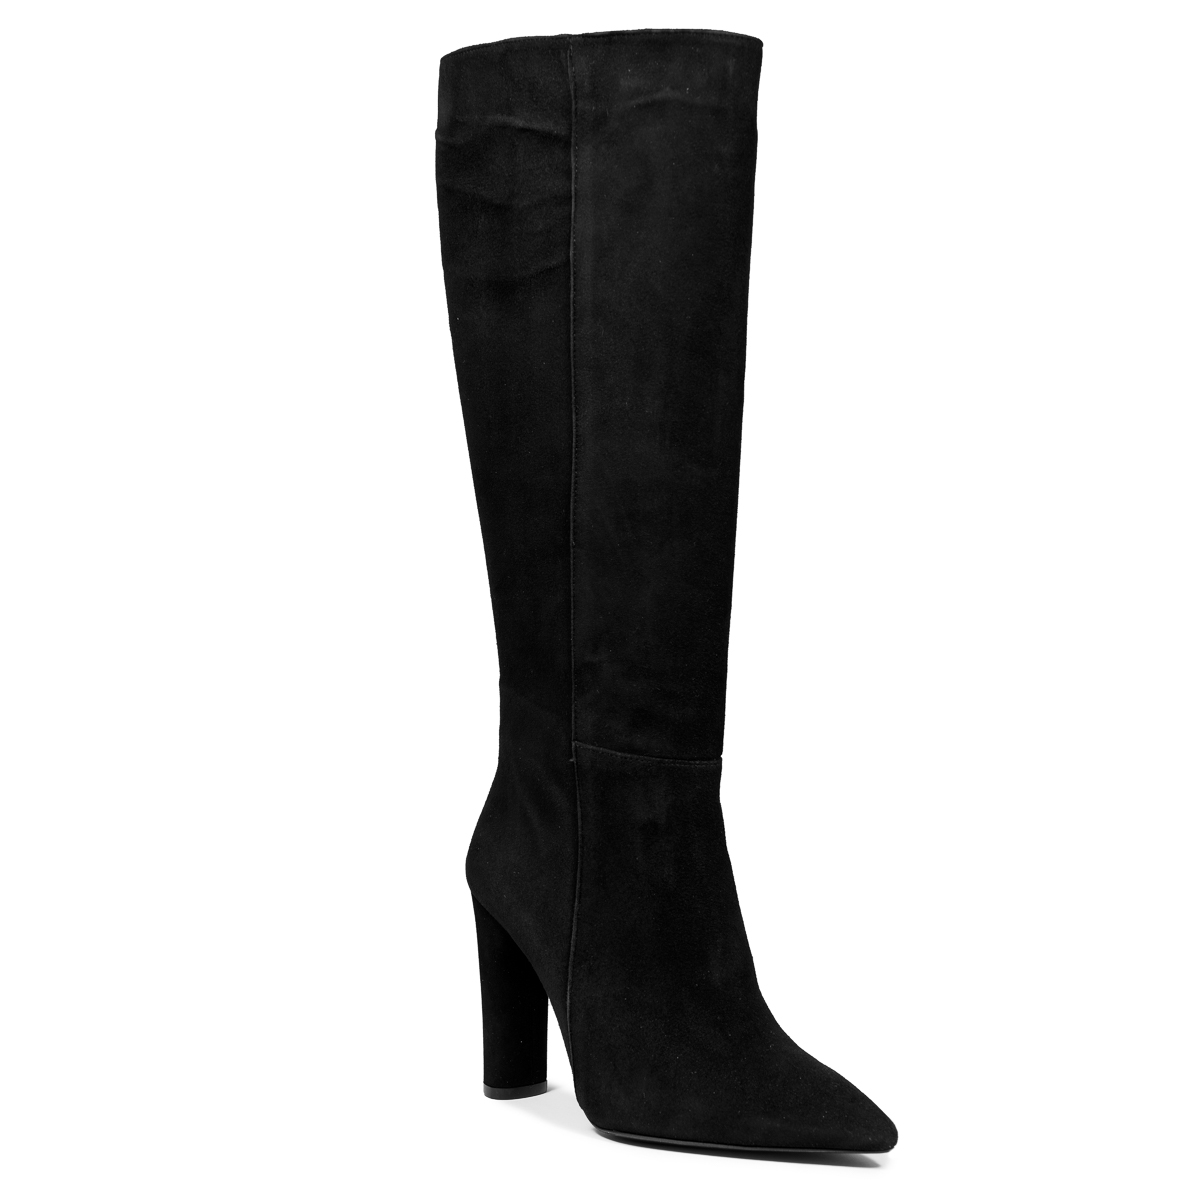 Black leather suede high heel boots boots NEW YORK 22 - Glamazons